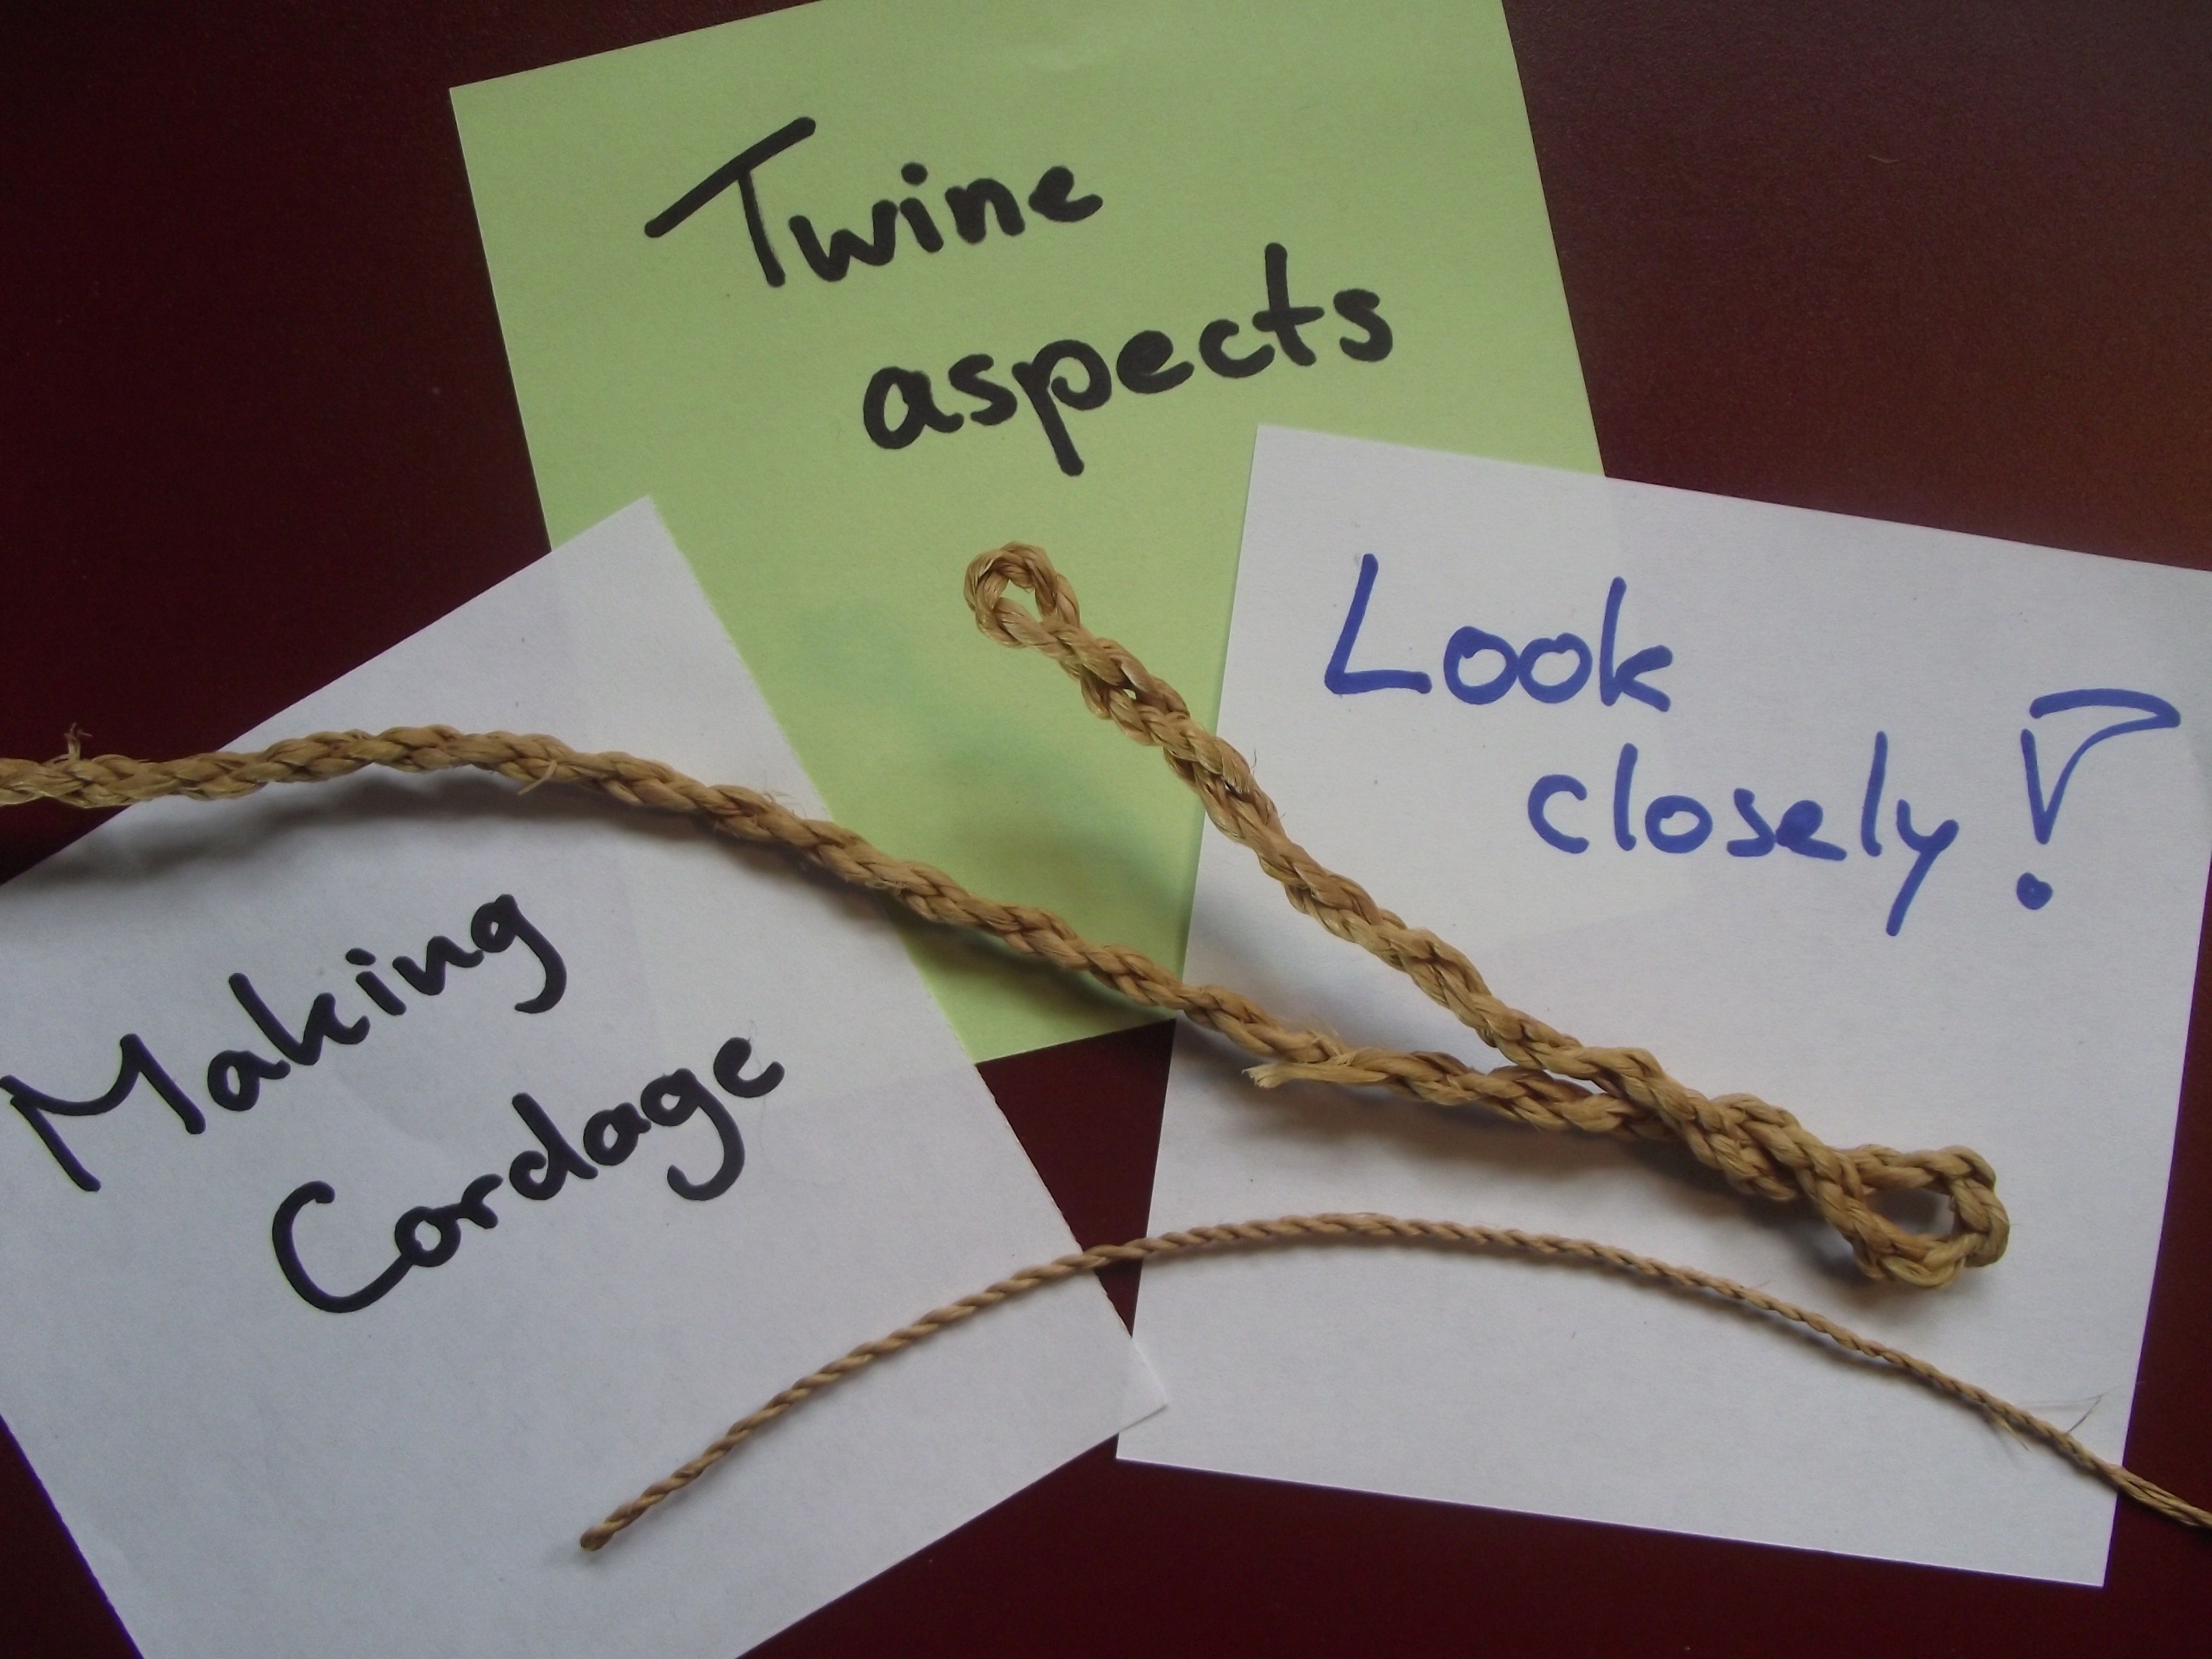 Making Cordage - Twine Aspects - Look closely